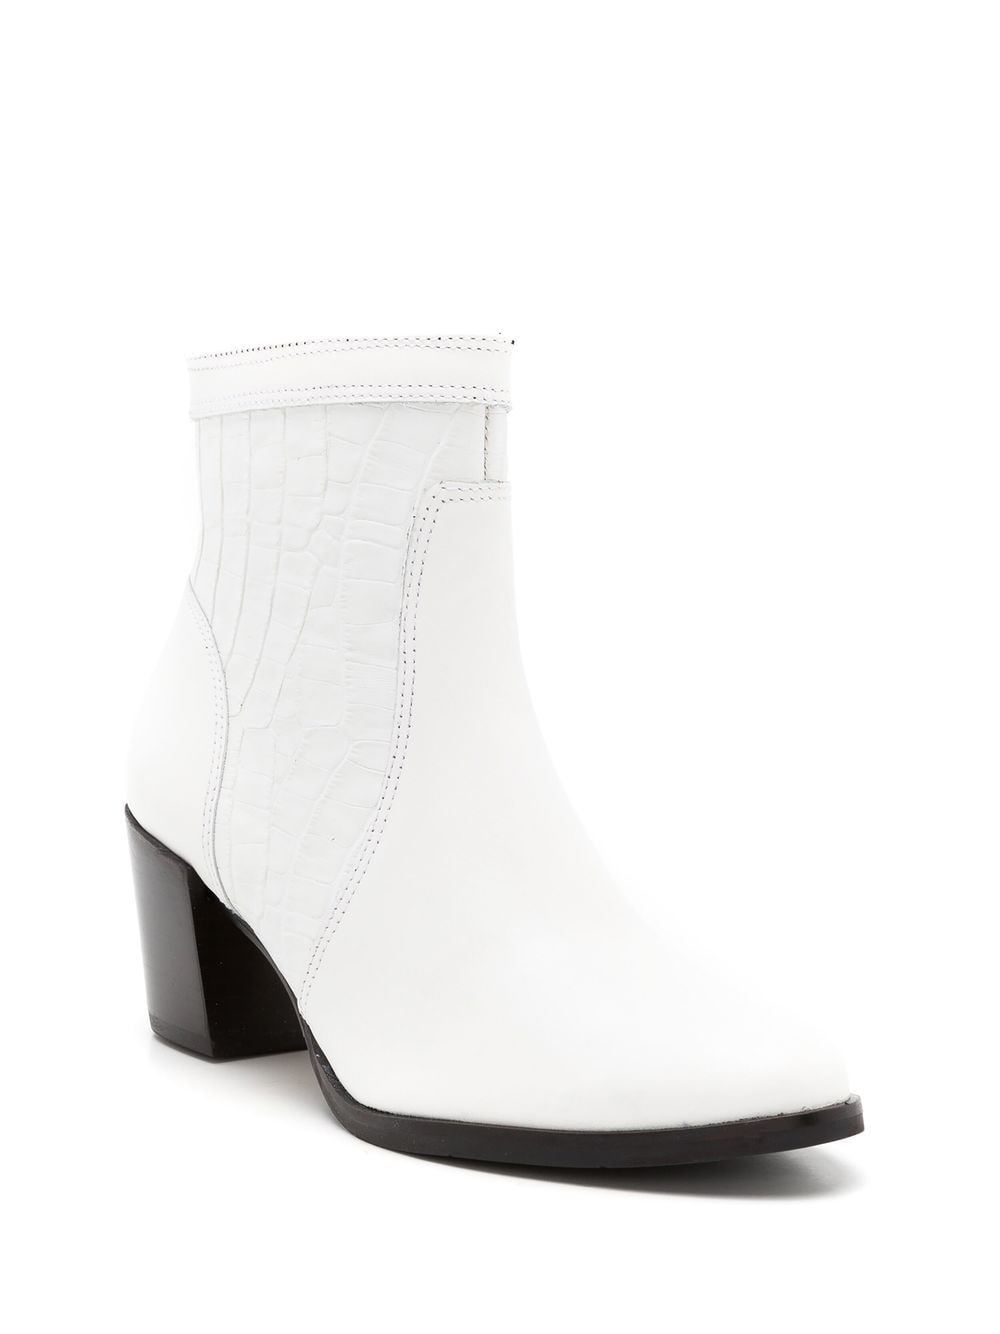 Shop Studio Chofakian Studio 70mm Ankle Boots In White